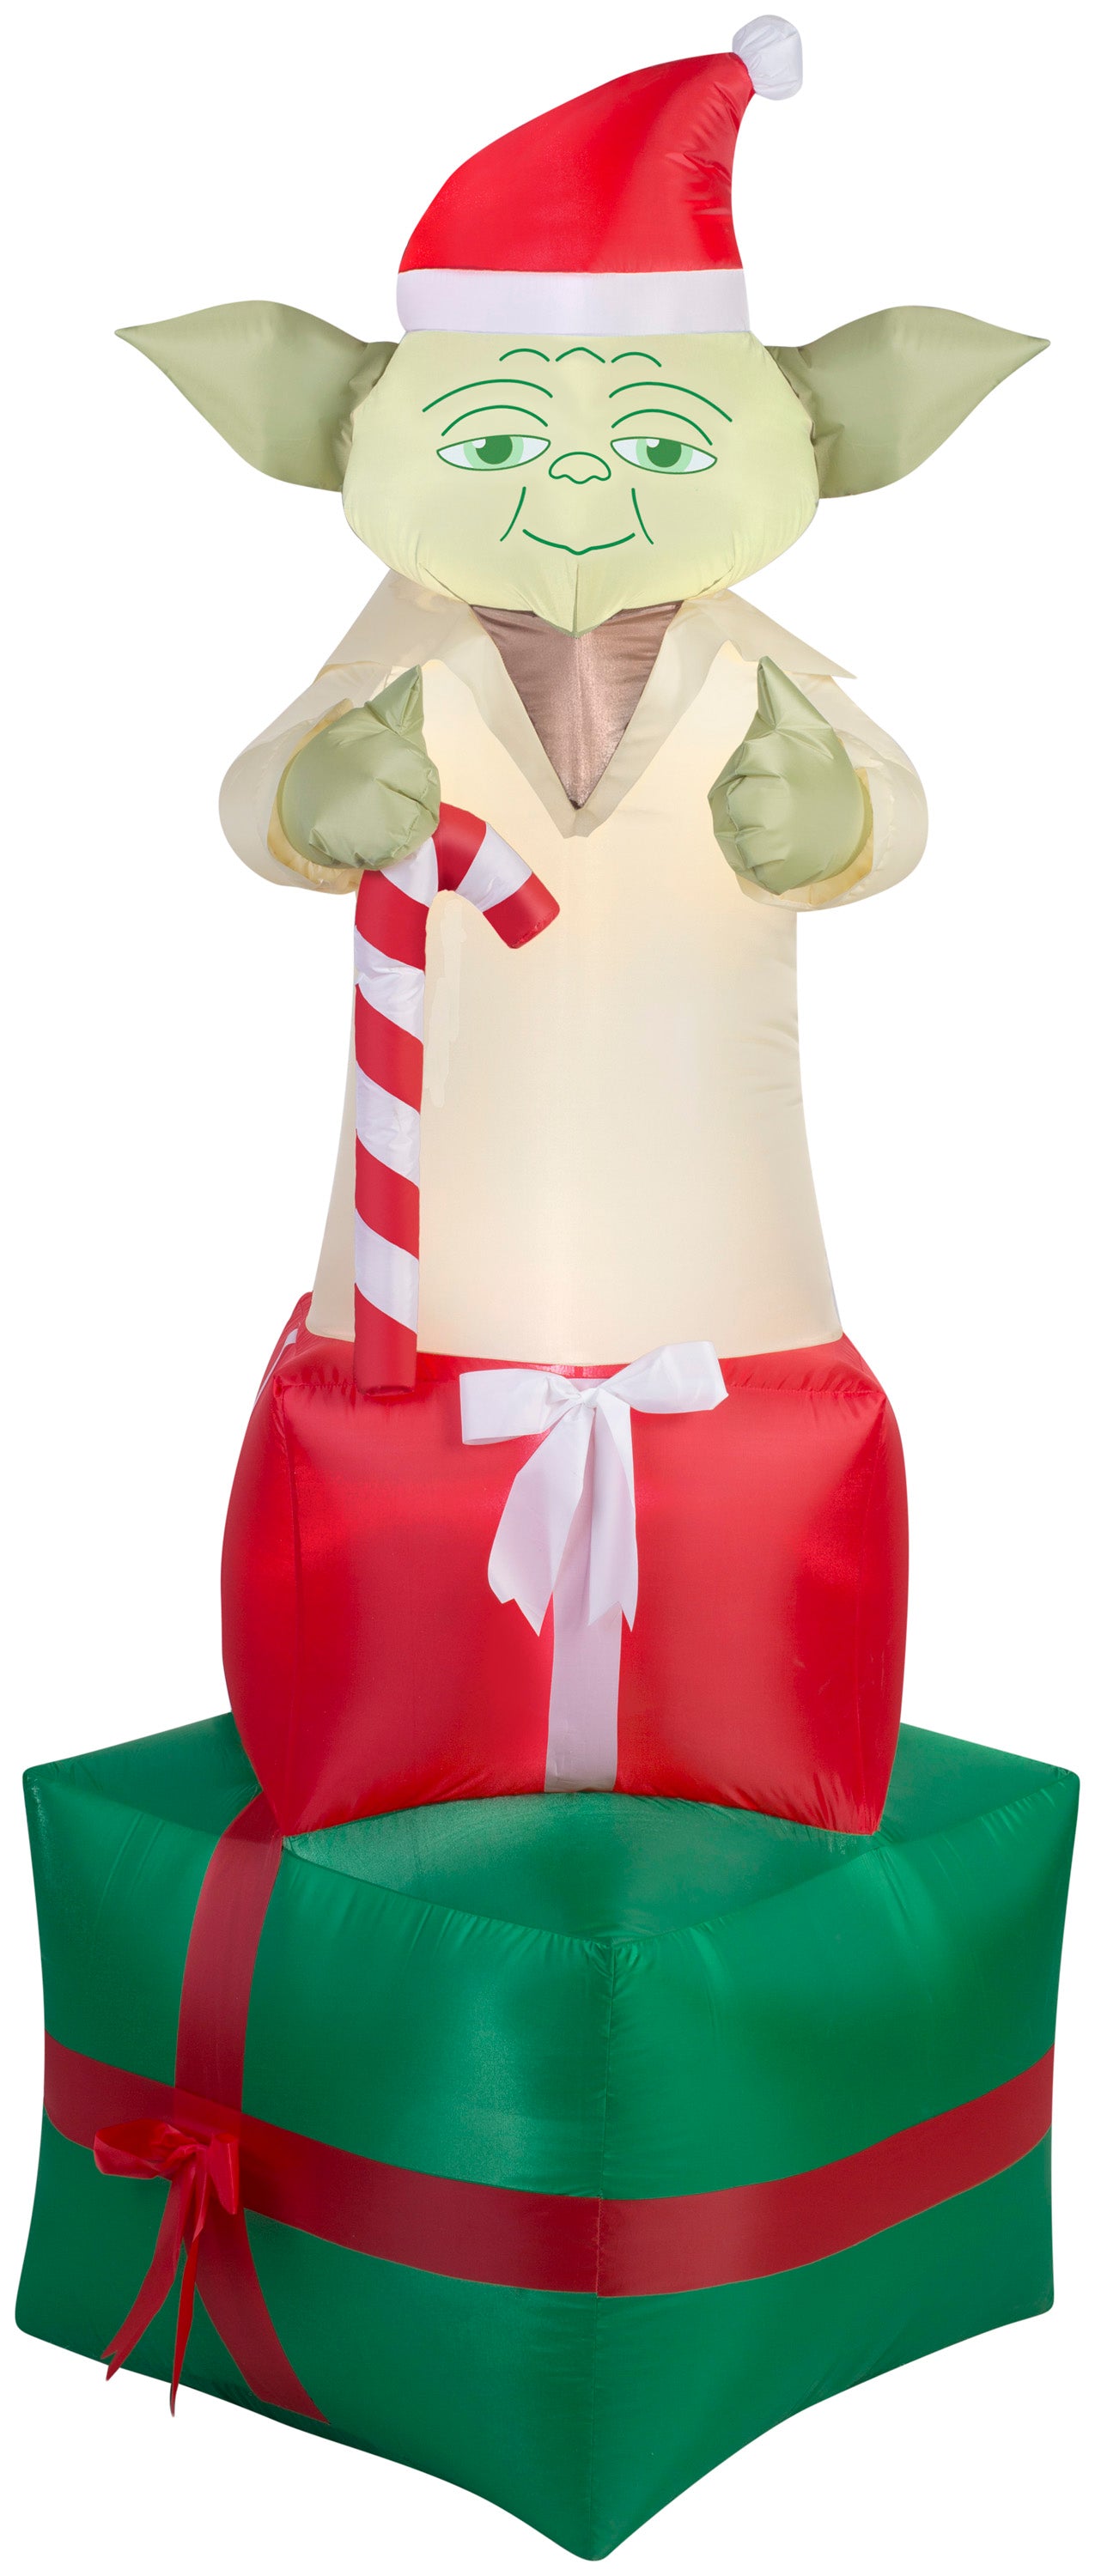 6' Airblown Yoda on Presents Star Wars Christmas Inflatable